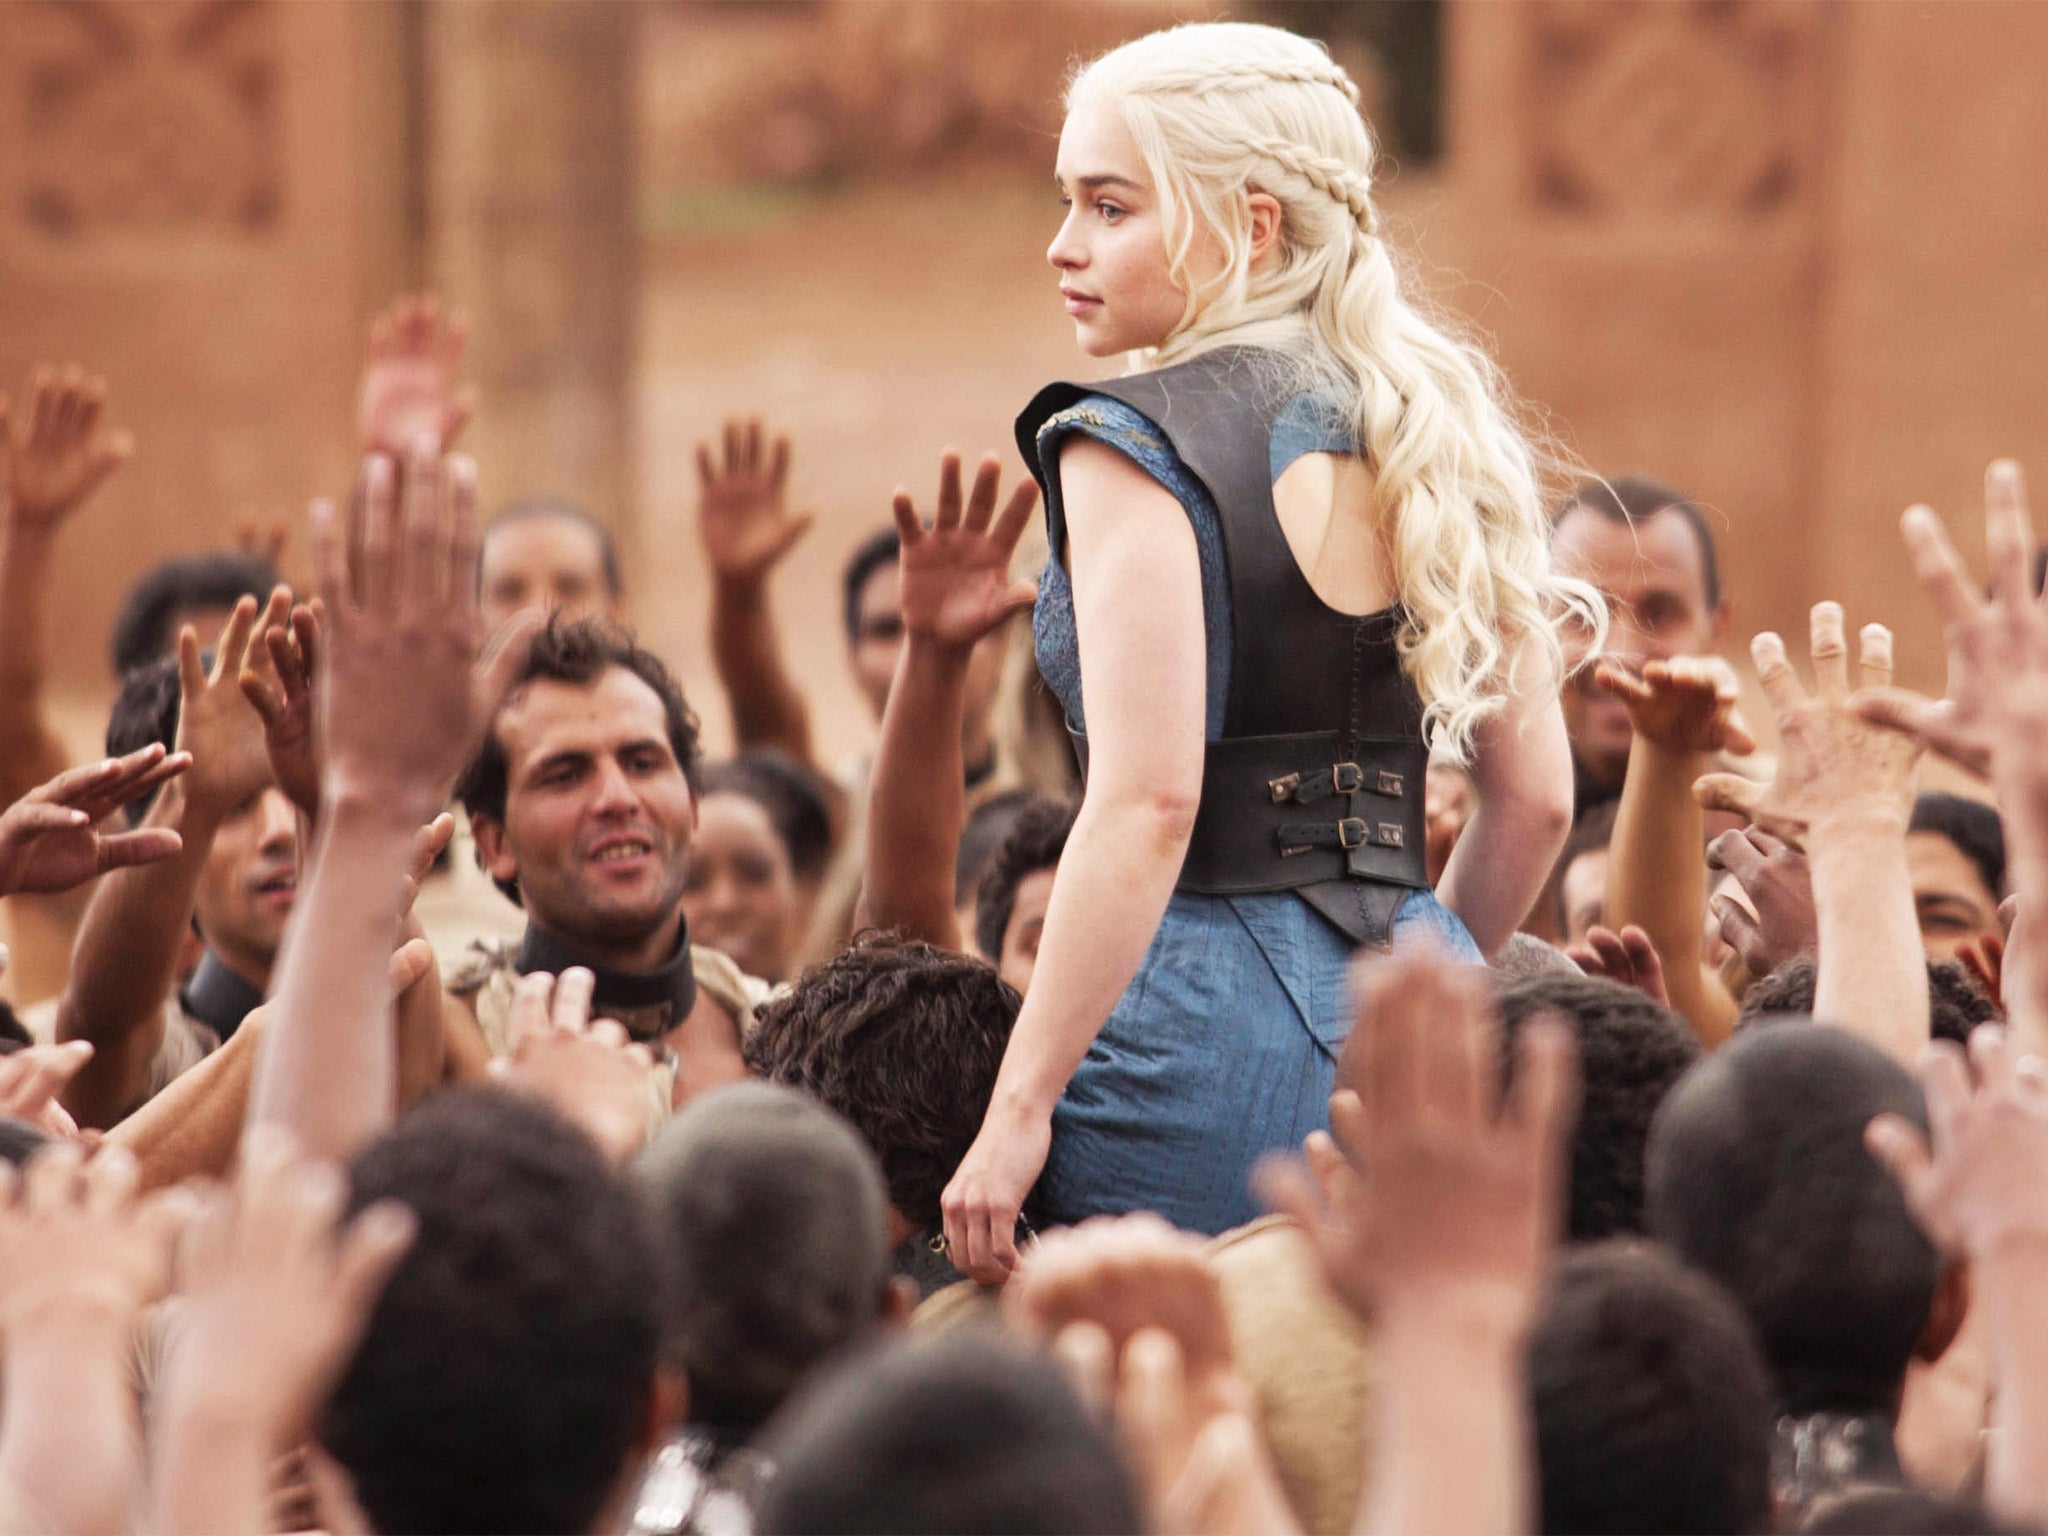 Daenerys Targaryen: Away from the action, but a key player in the region – much like the United States